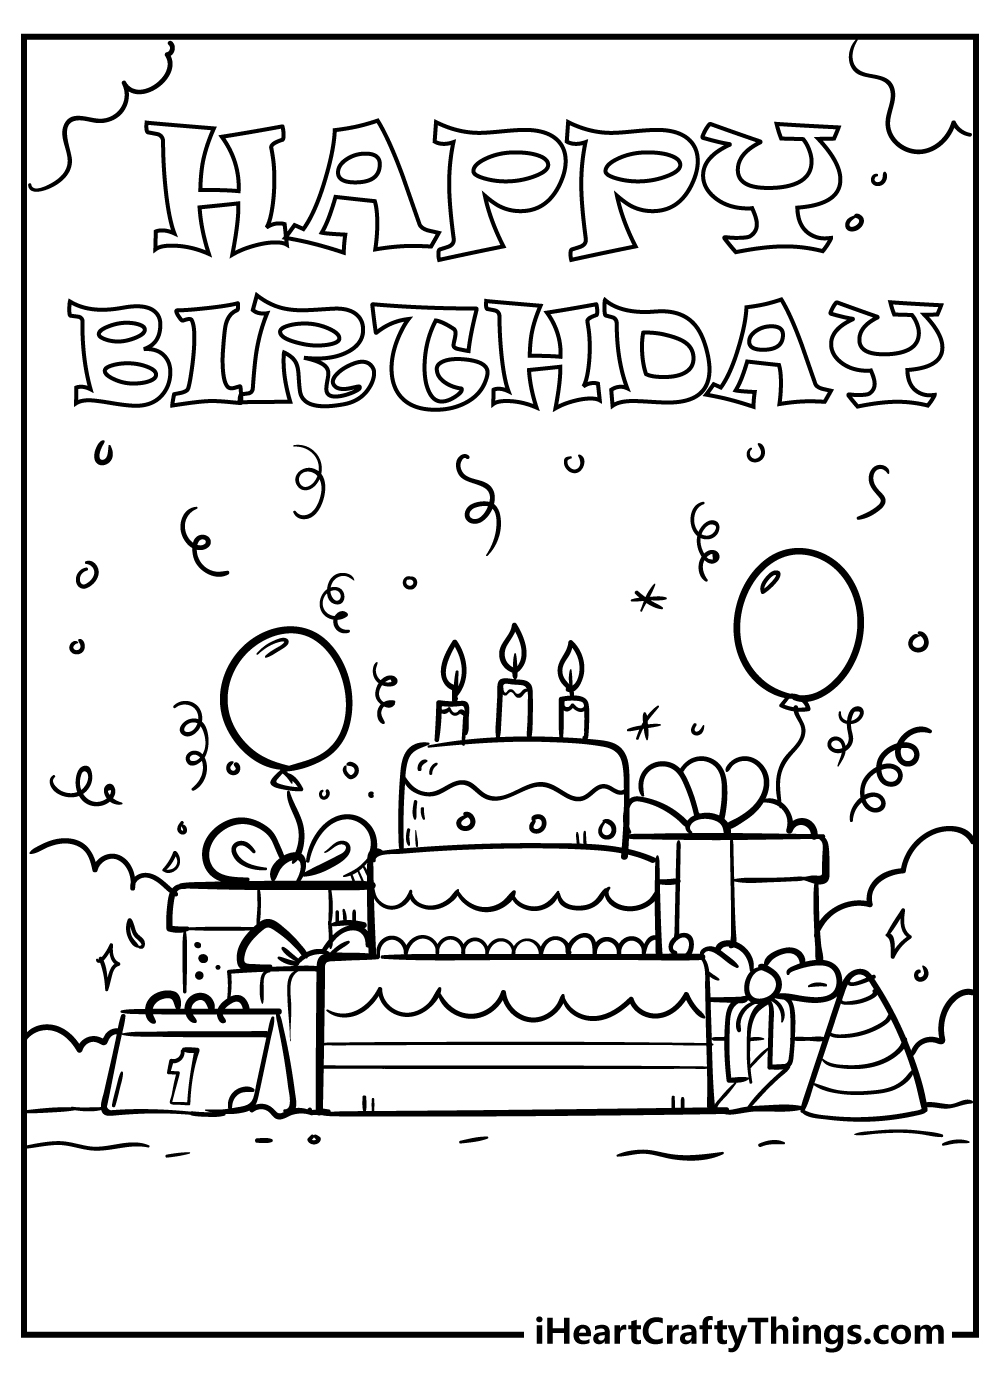 Happy Birthday coloring pages free printable